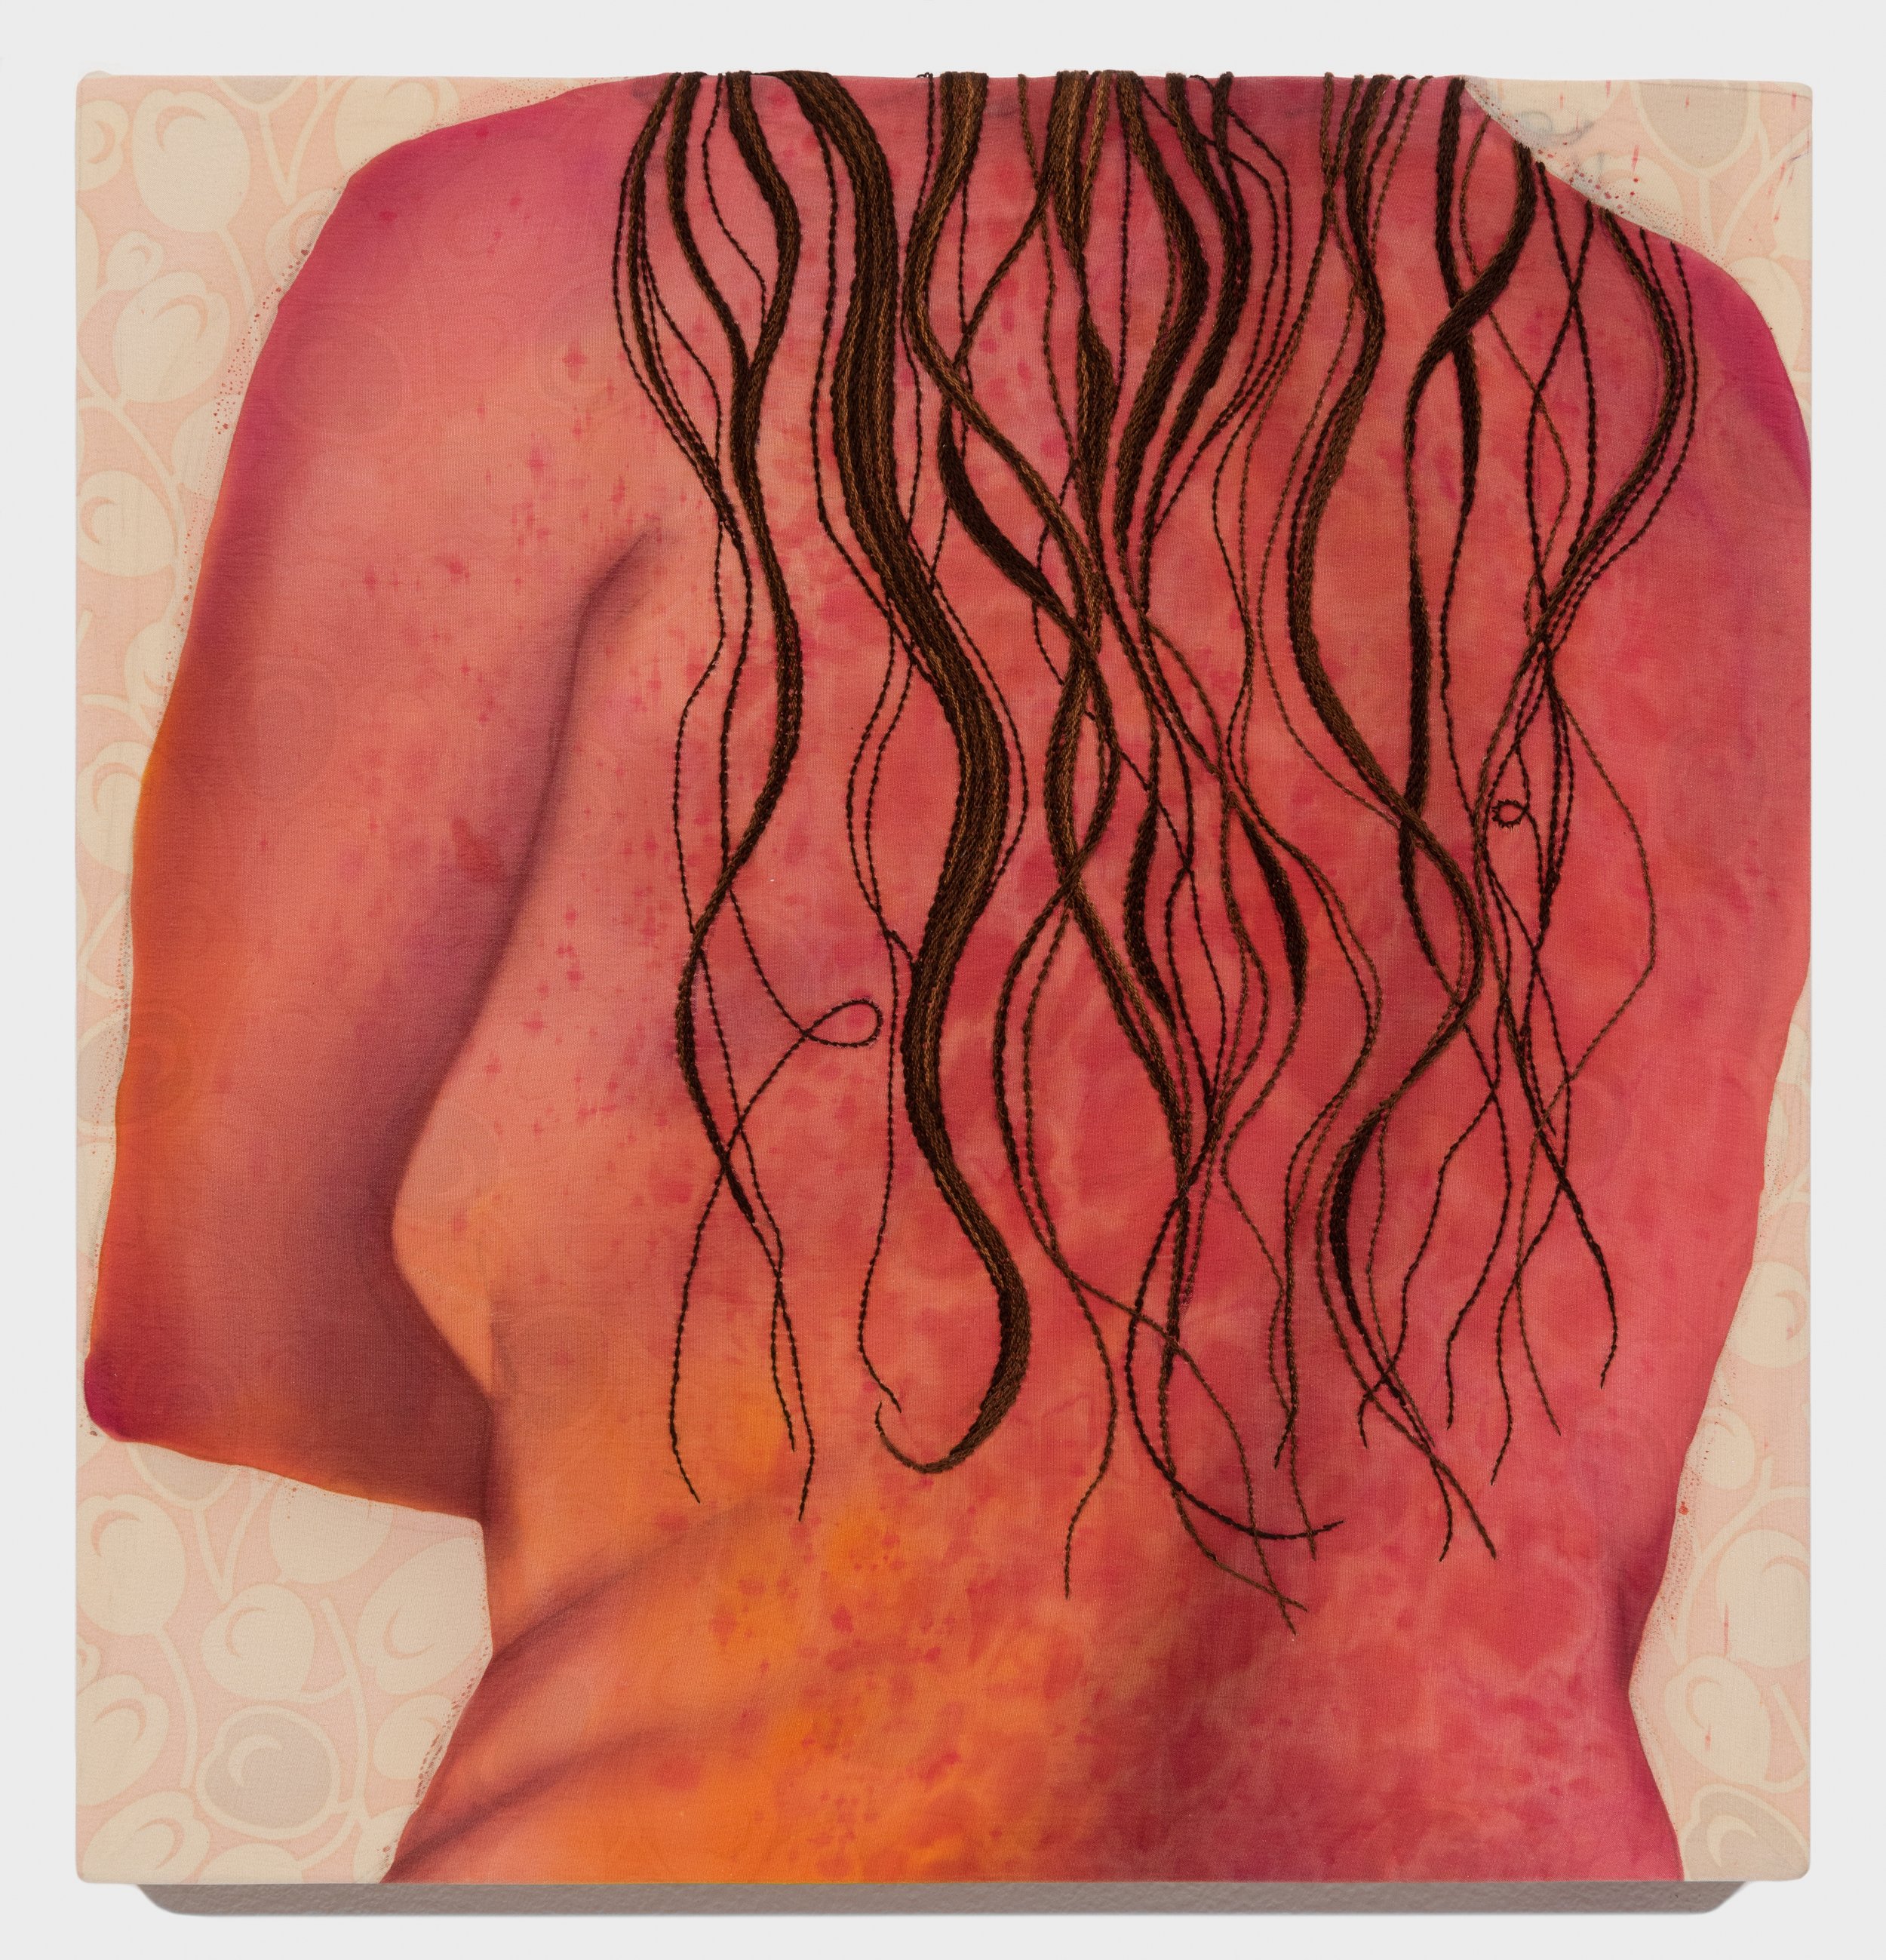  Katarina Riesing  Wet Hair , 2021 Dye and embroidery on Silk crepe de chine 13 x 12.5 inches / 33.02 x 31.75 cm 